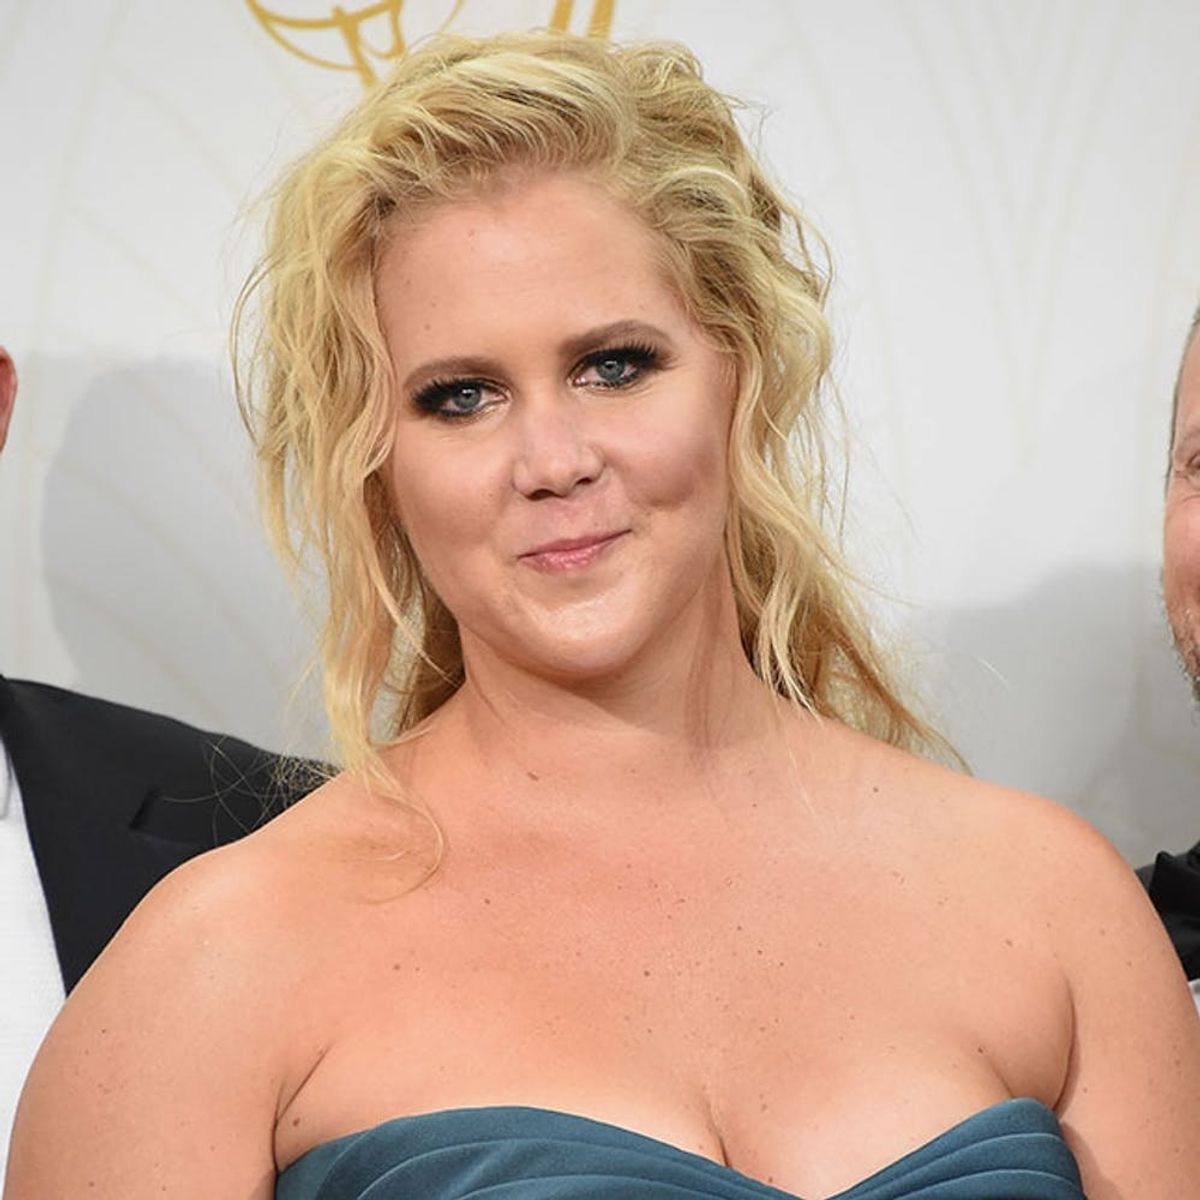 This Is the Surprising 2016 Calendar Amy Schumer + Serena Williams Posed For